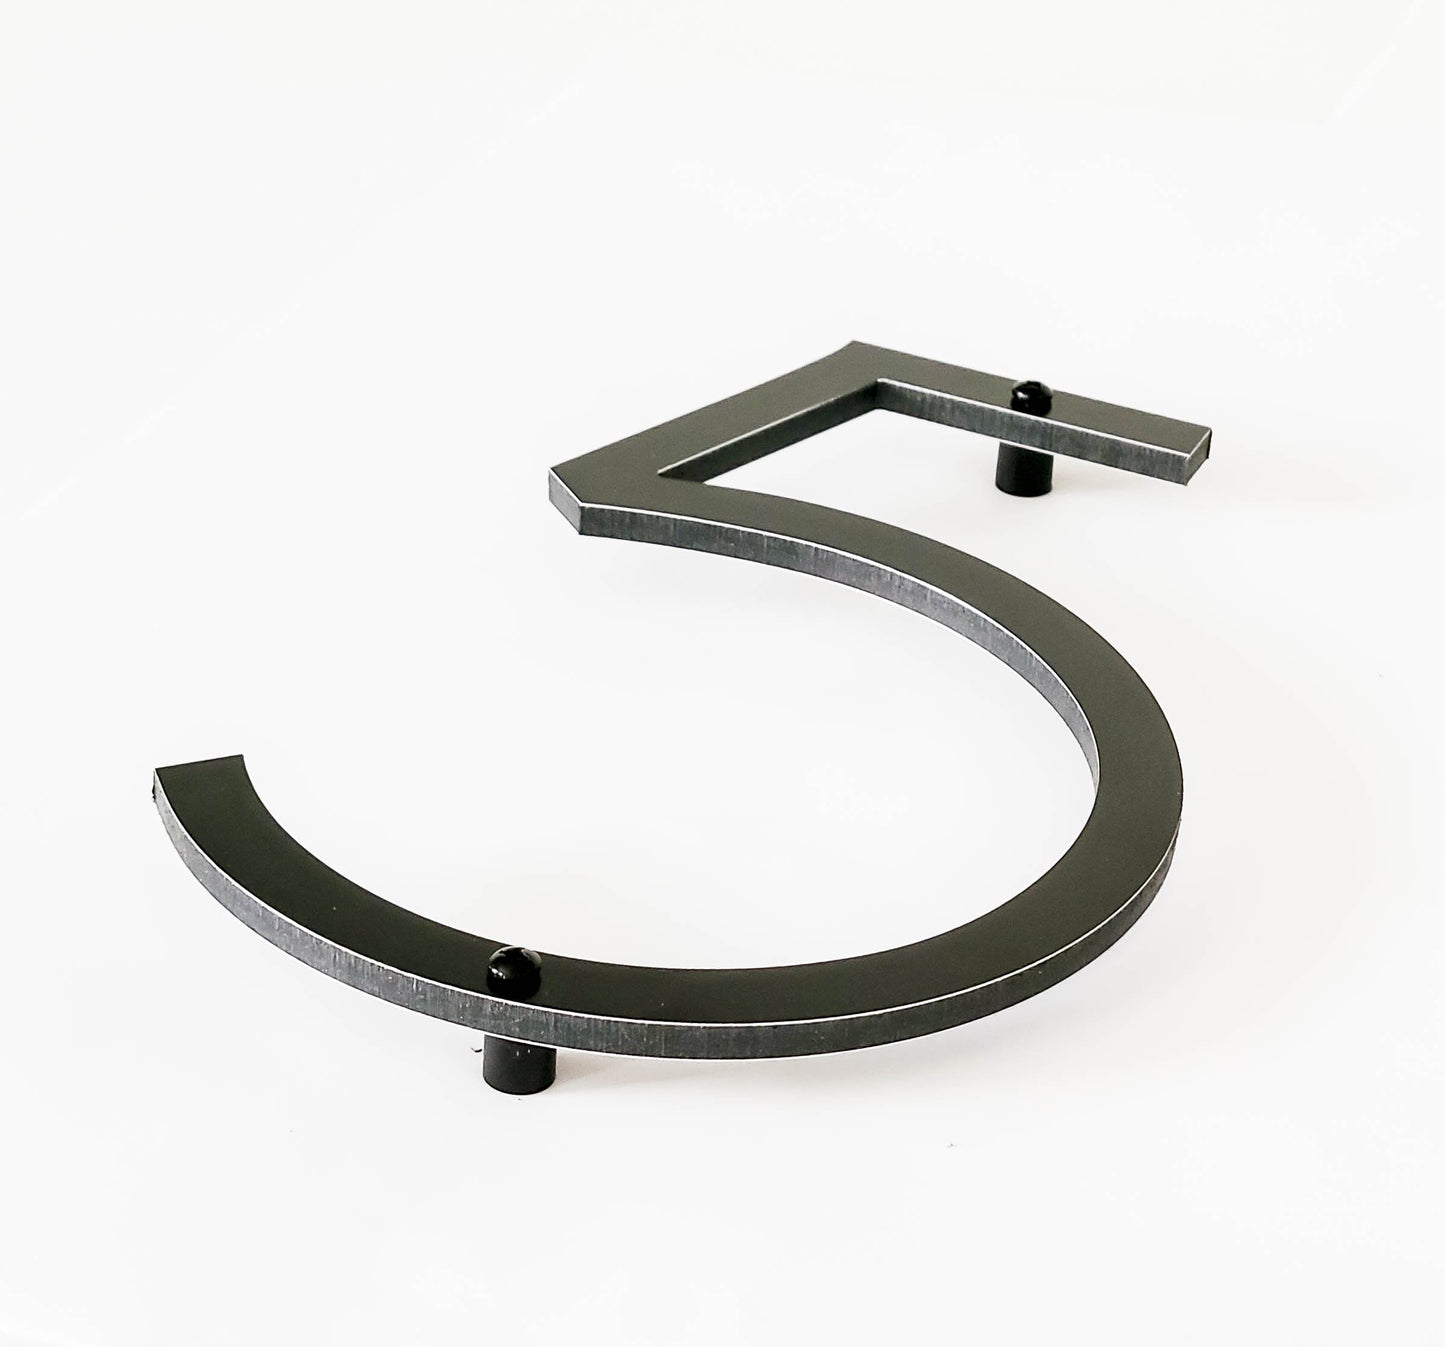 THIN MODERN house numbers showing standoffs and spacers for floating look